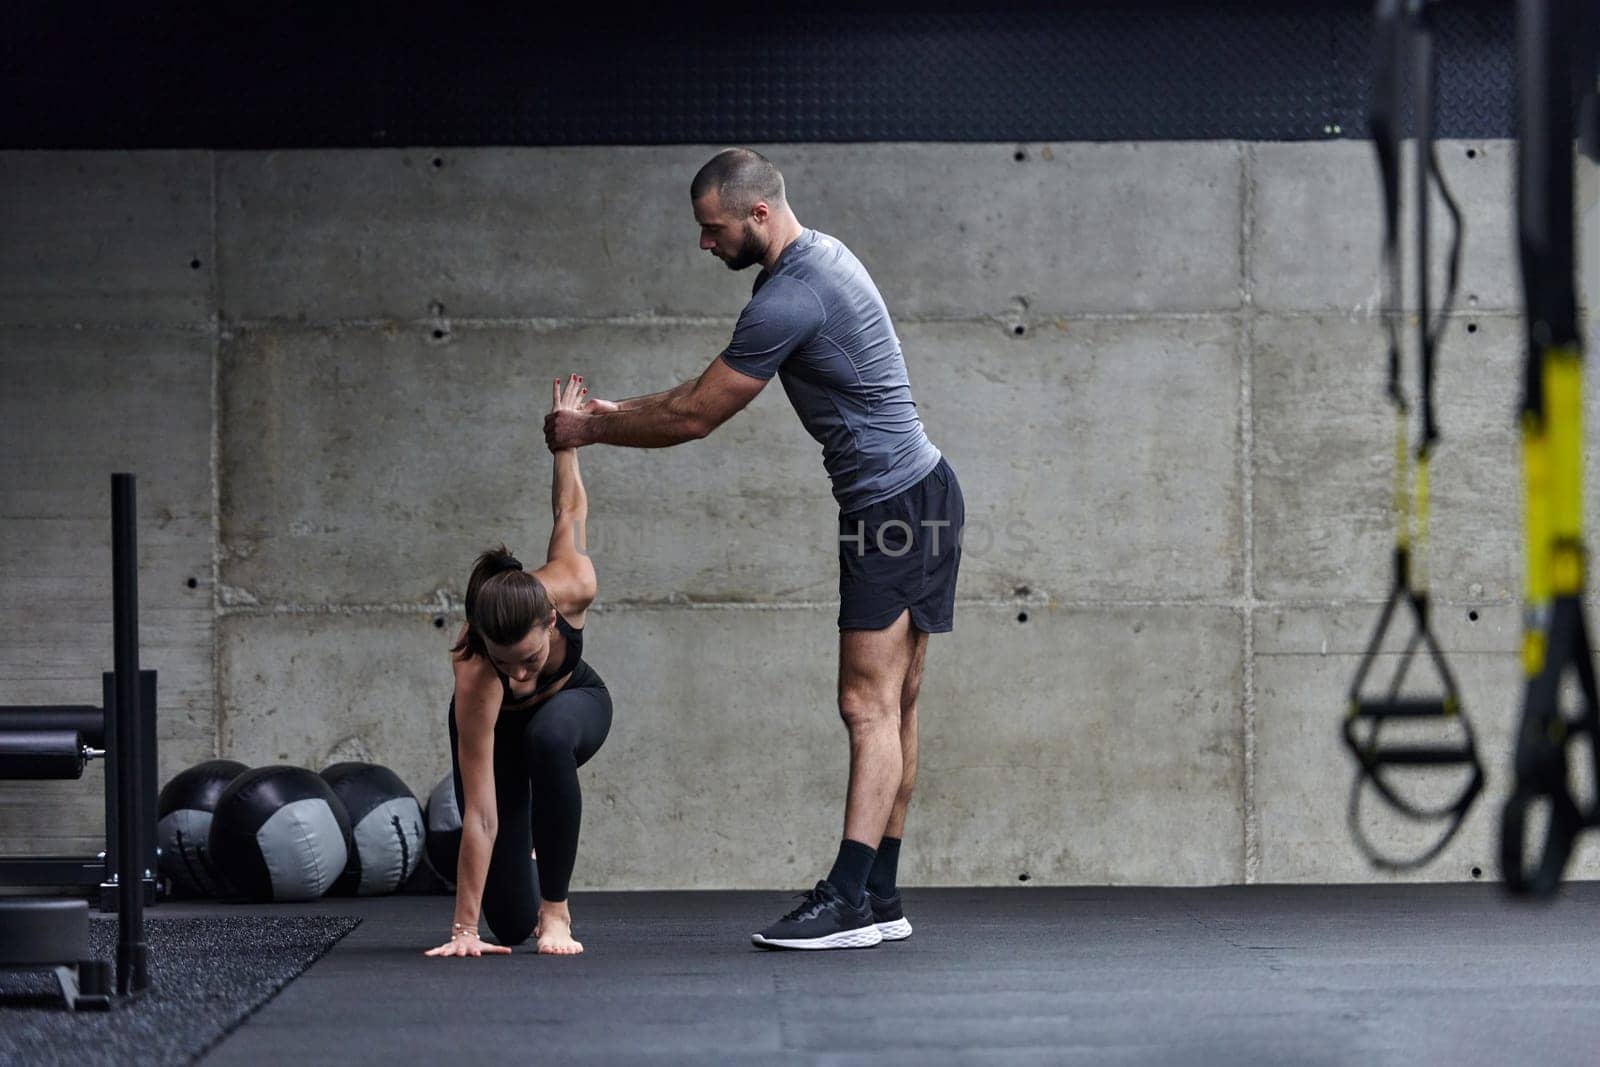 A muscular man assisting a fit woman in a modern gym as they engage in various body exercises and muscle stretches, showcasing their dedication to fitness and benefiting from teamwork and support by dotshock